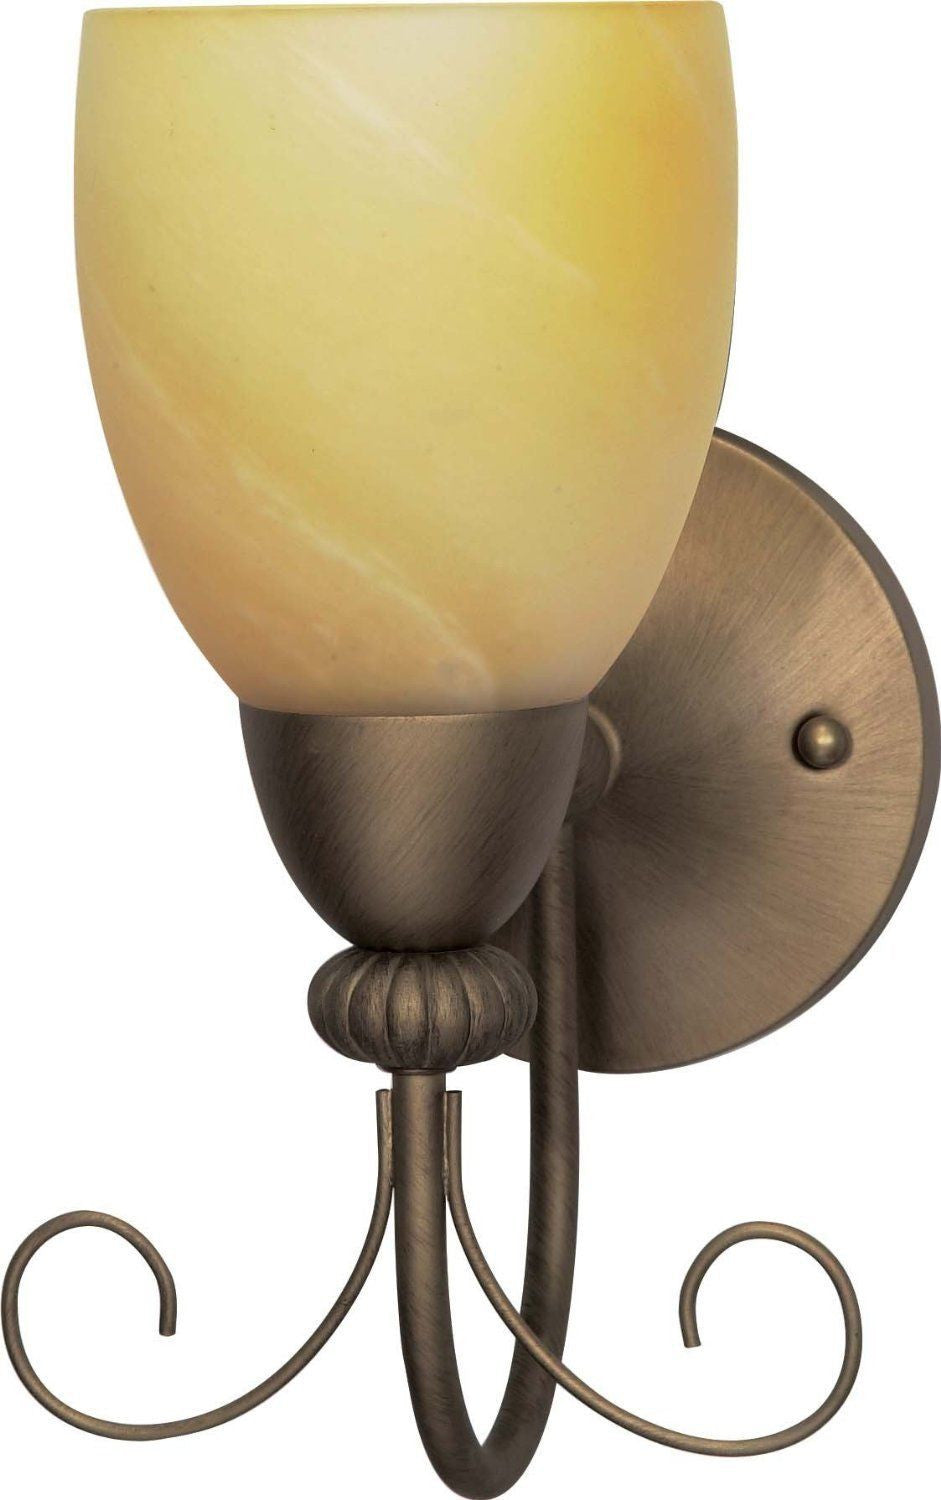 Nuvo Lighting 60-149 Vanguard Collection One Light Wall Sconce in Flemish Gold Finish